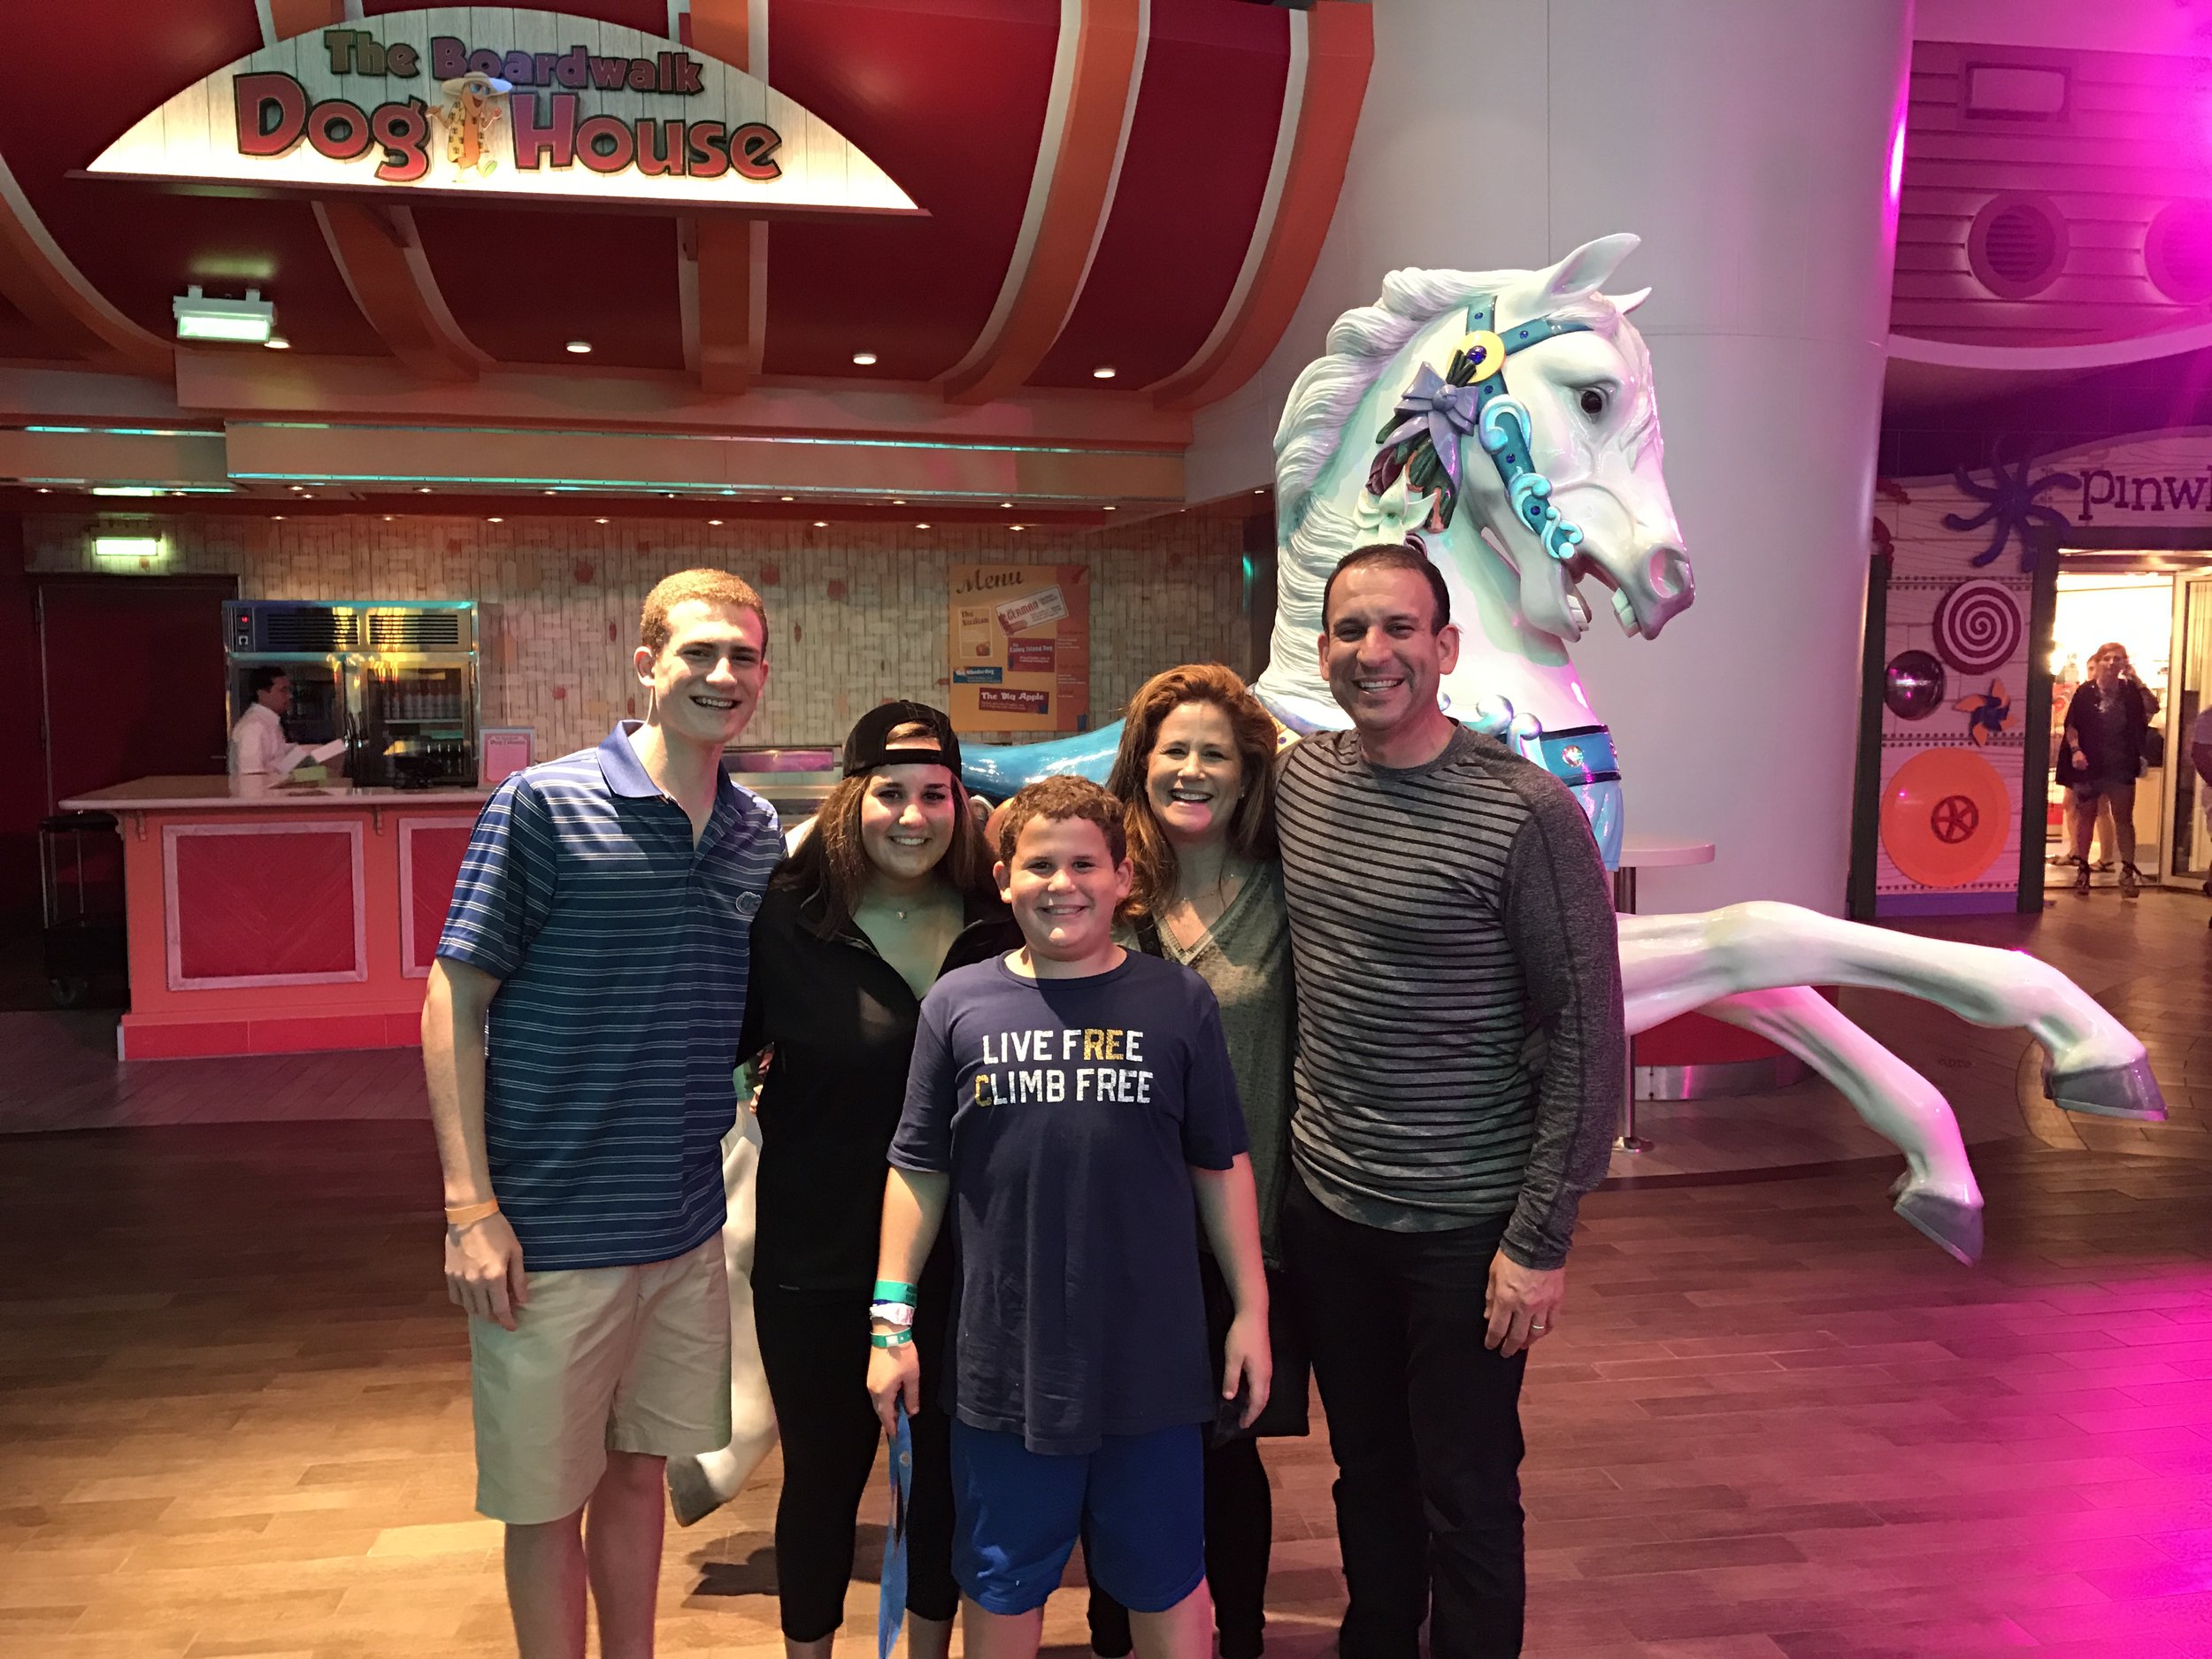 Royal Caribbean's Oasis out of Port Canaveral. Family cruise over winter break 2016. Great family time.